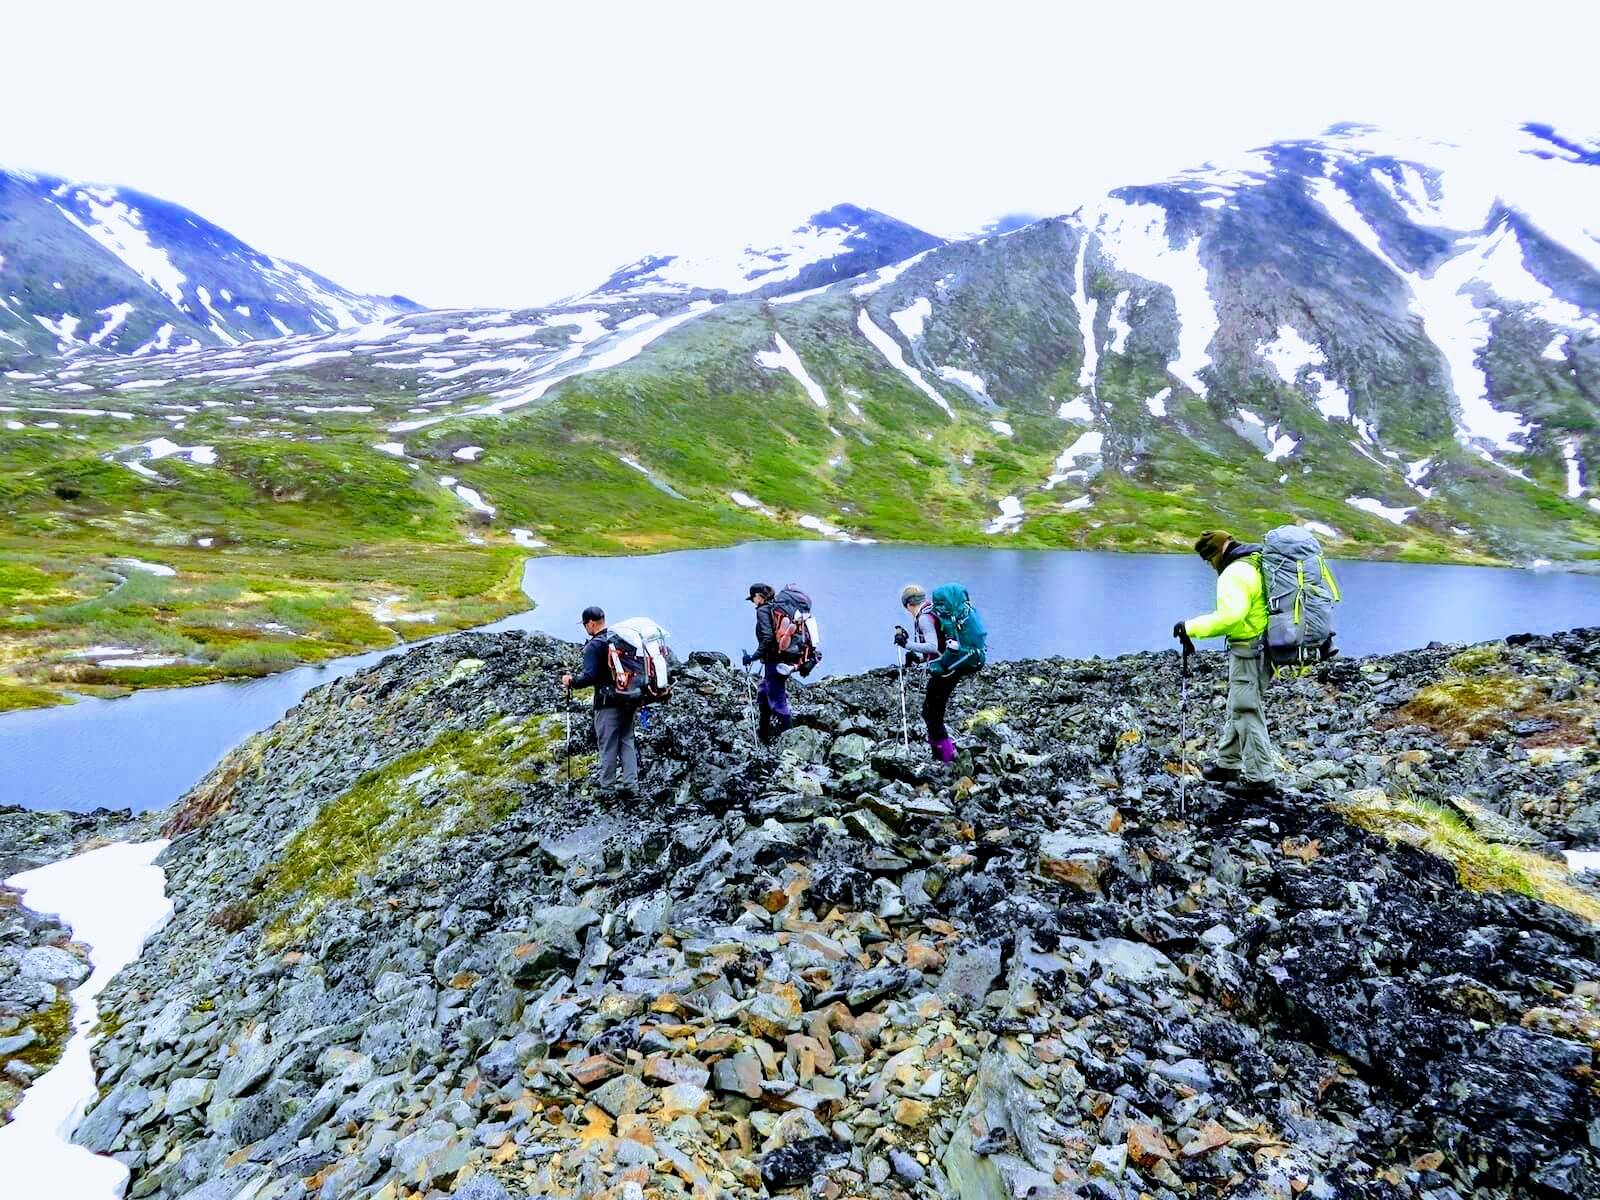 Single Day or Multi Day Backpacking Trips in Alaska?